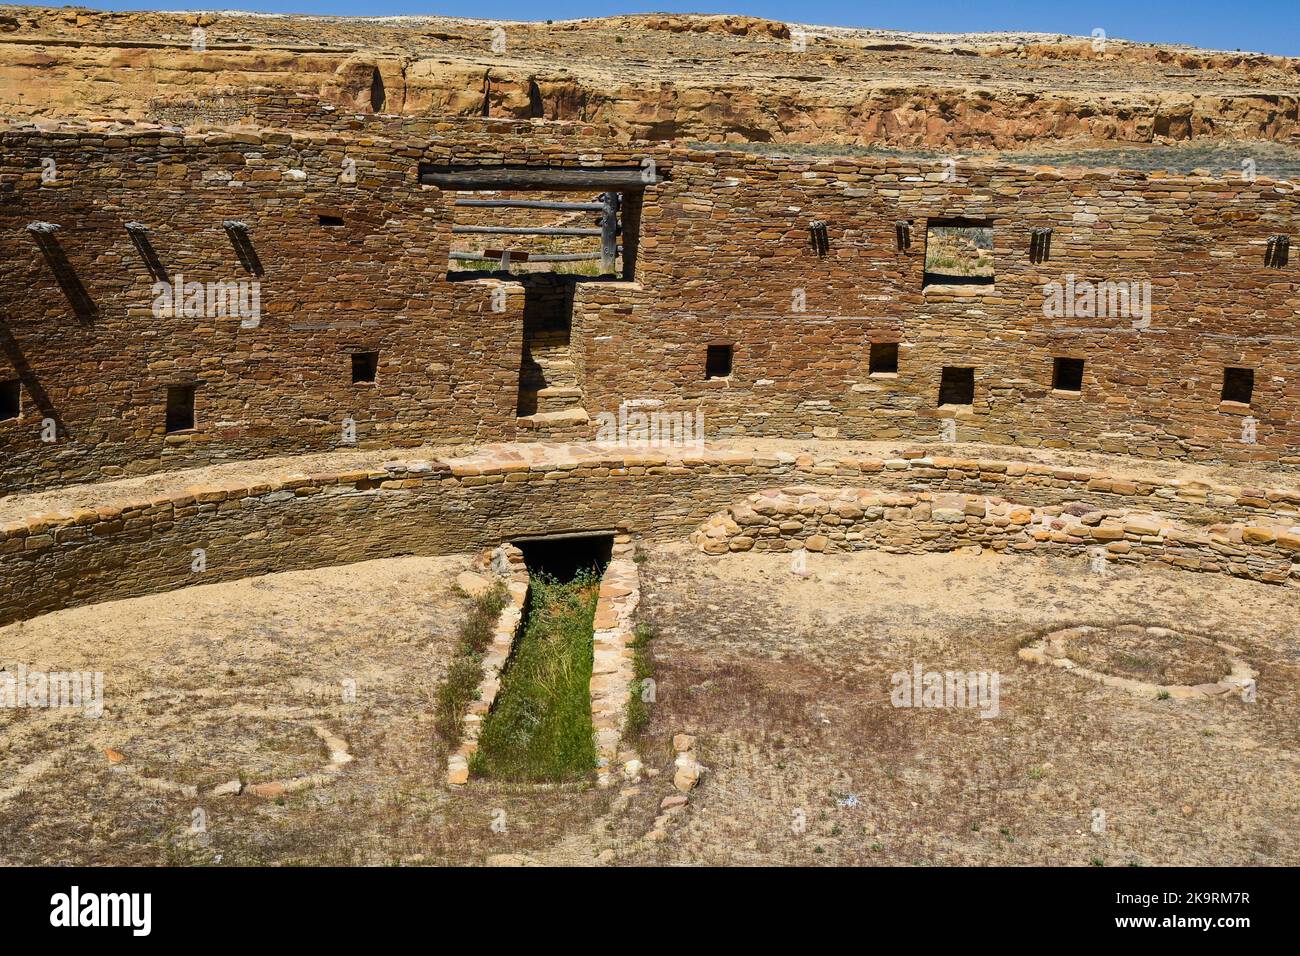 Chaco Culture National Historical Park in New Mexico Stock Photo